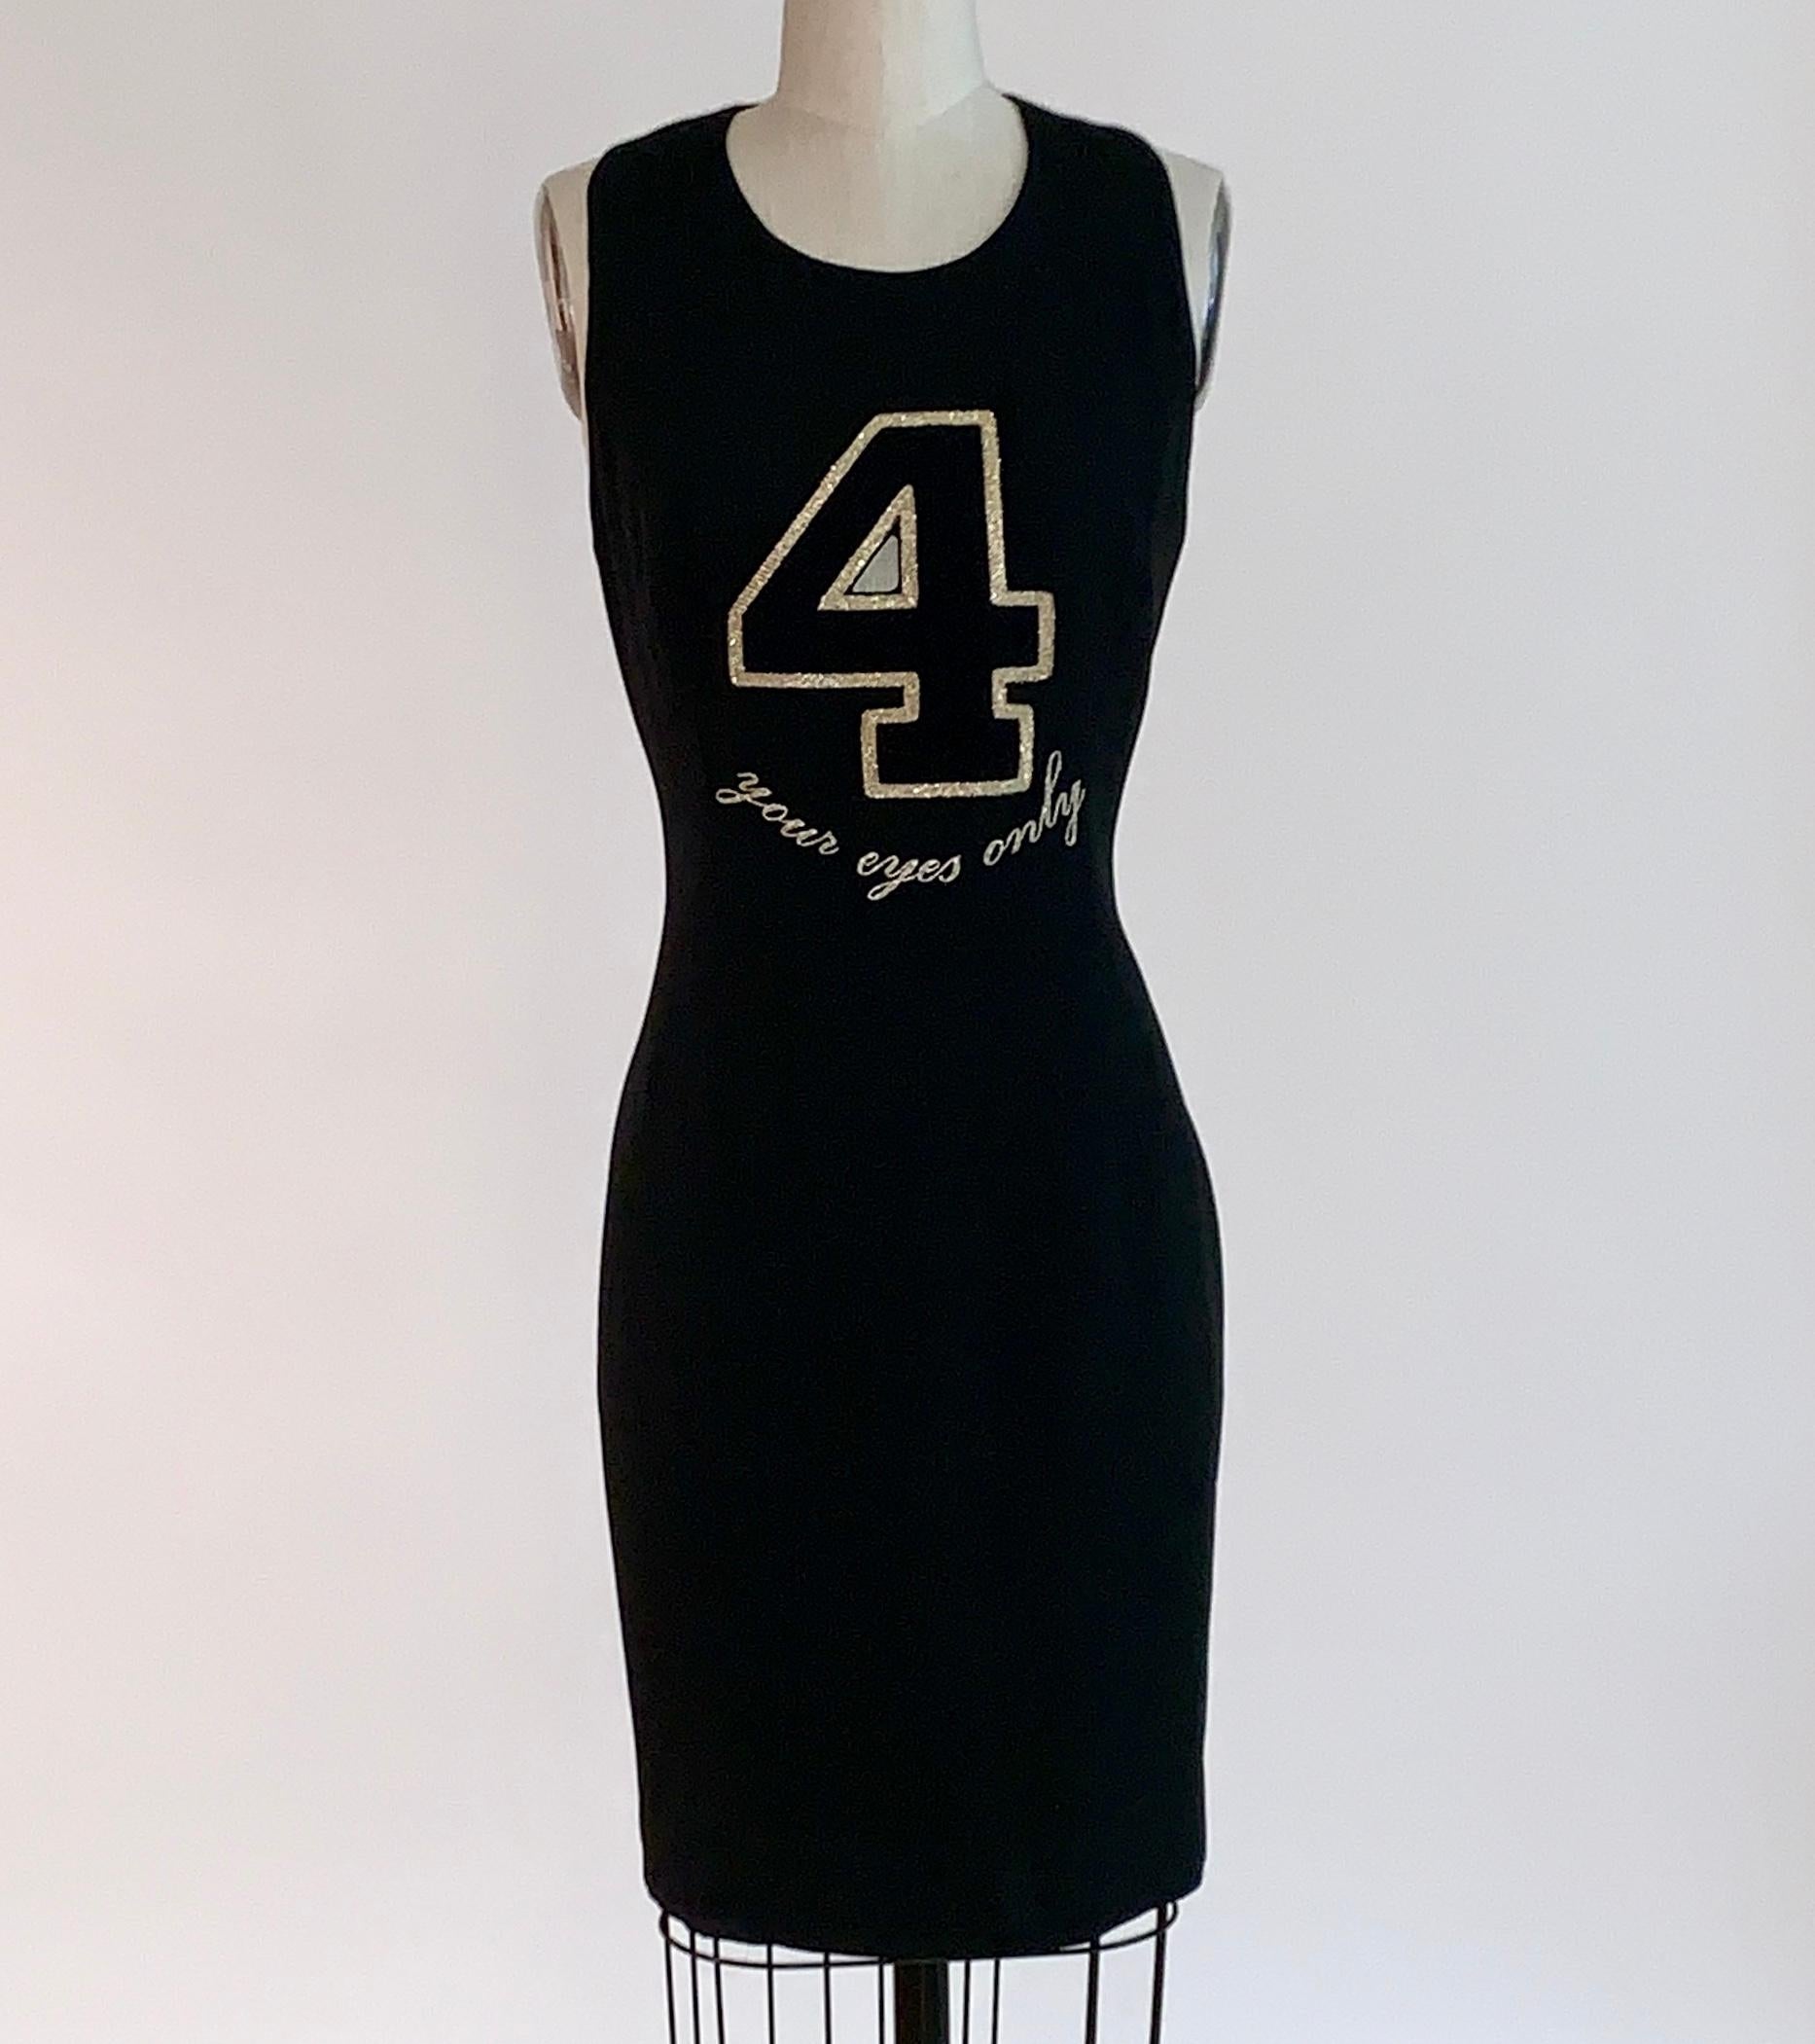 Vintage 1990s Moschino Cheap & Chic black and gold sleeveless sheath dress with 4 your eyes only appliqué at front. (The four is a school-letter style patch, while the 